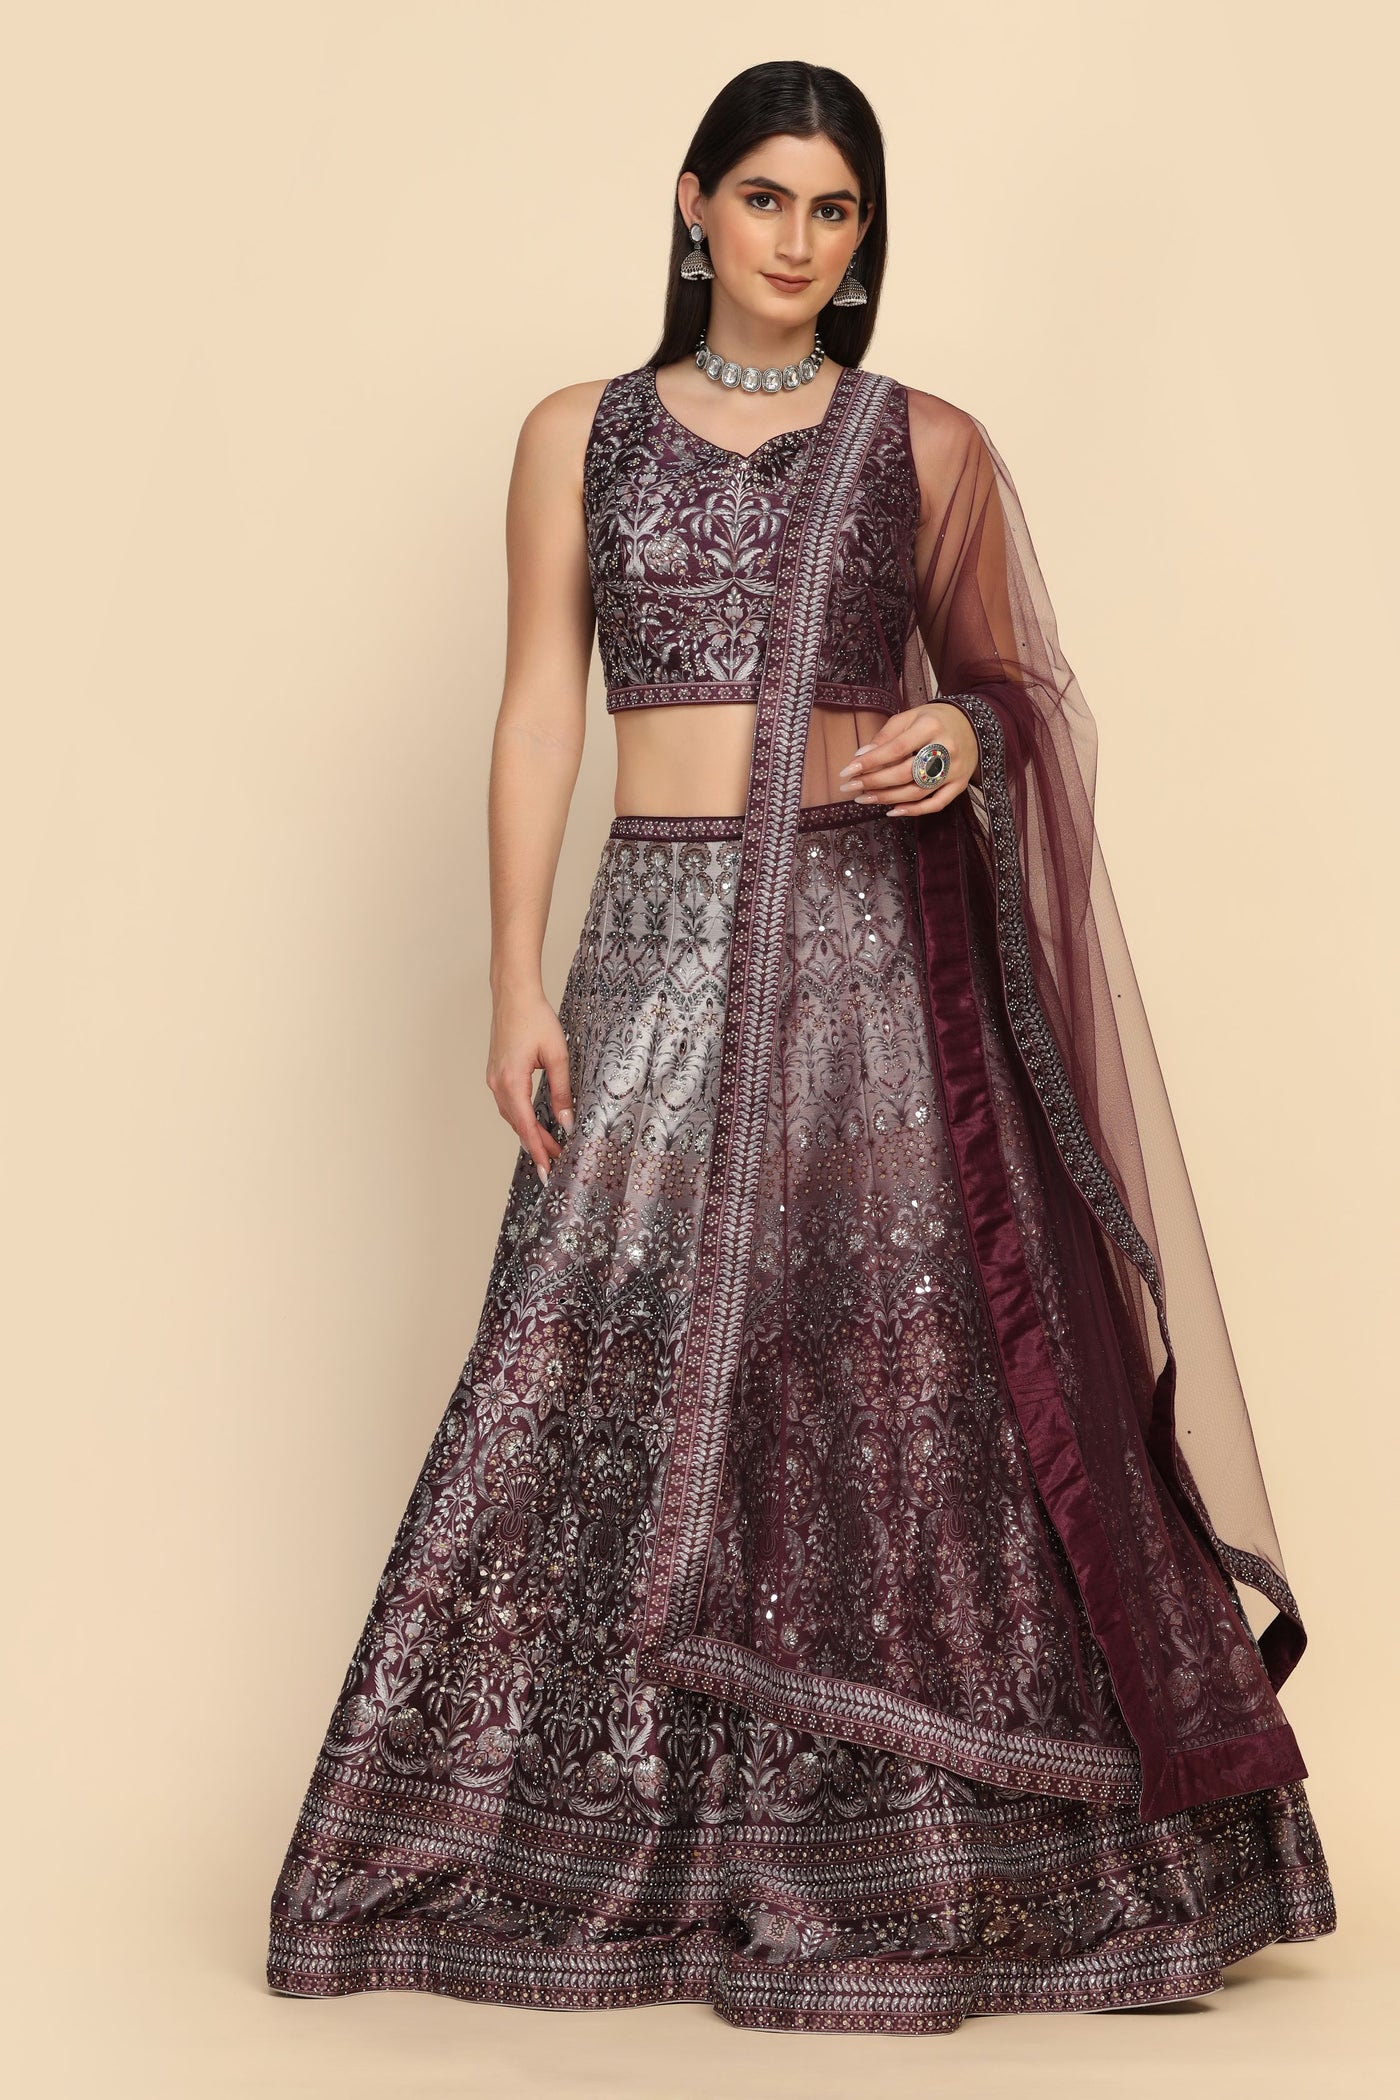 Beautiful wine color floral motif embroidered lehenga